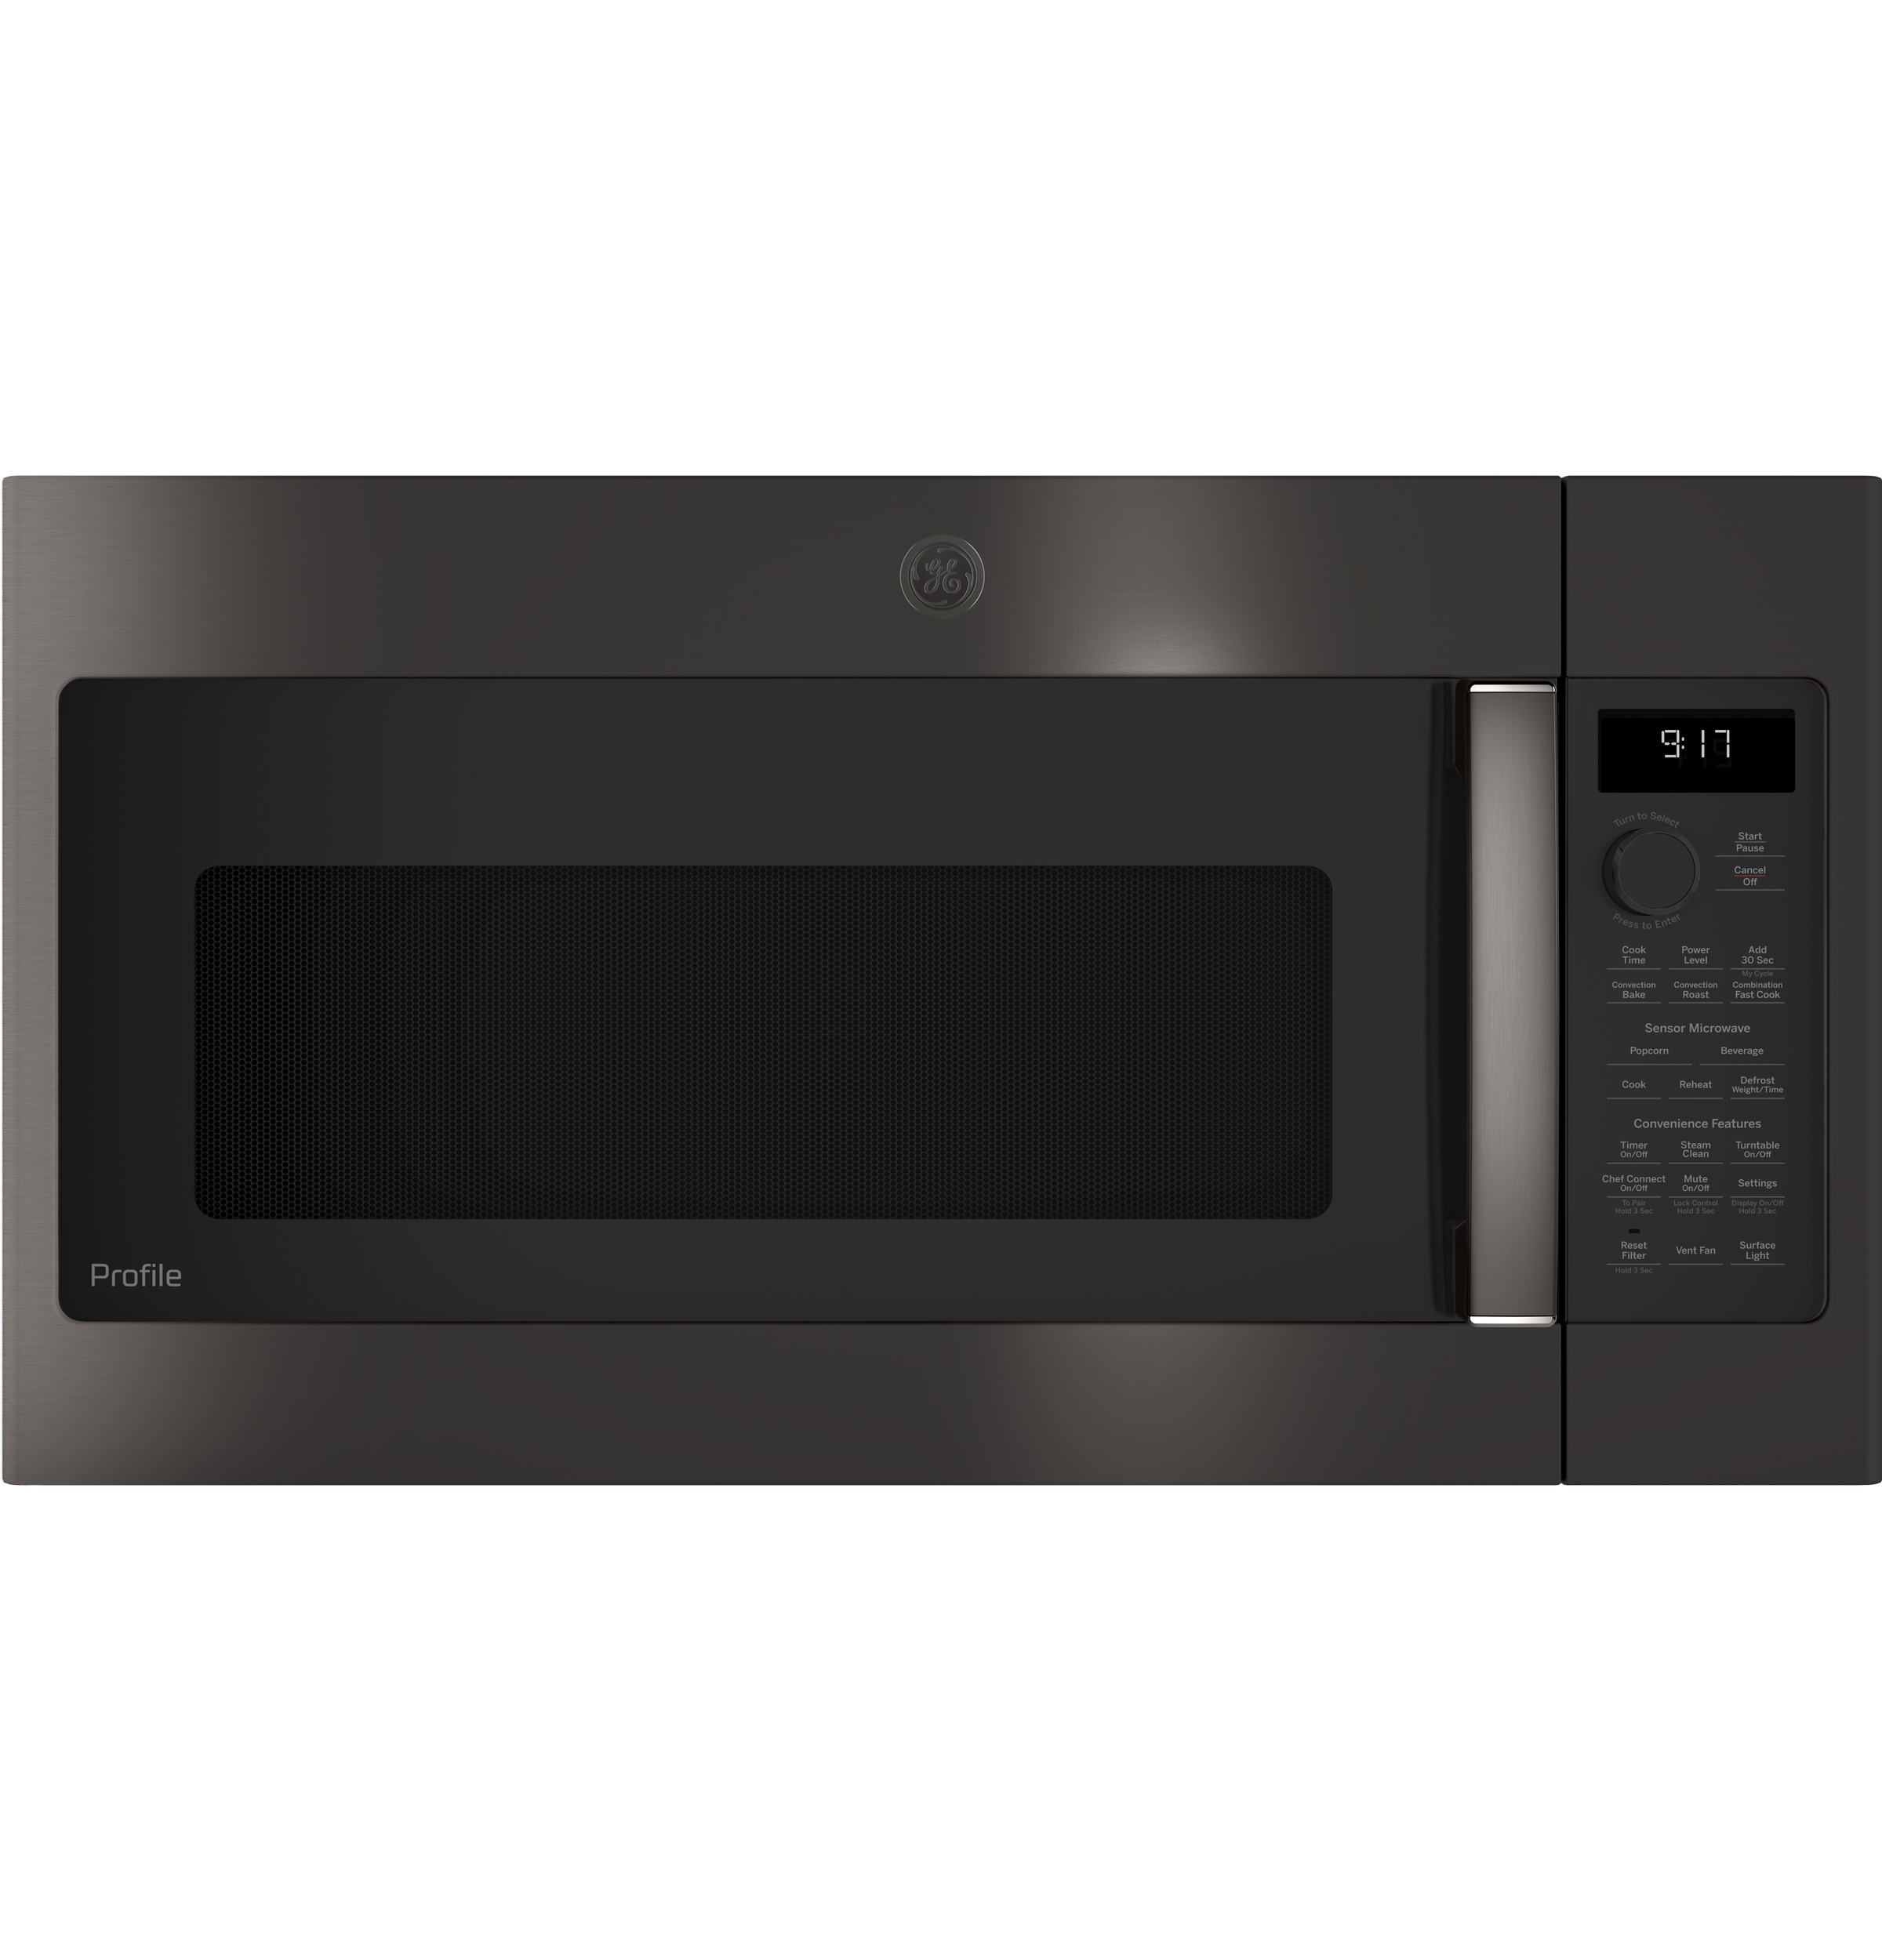 Model: PVM9179BLTS | GE Profile GE Profile™ 1.7 Cu. Ft. Convection Over-the-Range Microwave Oven